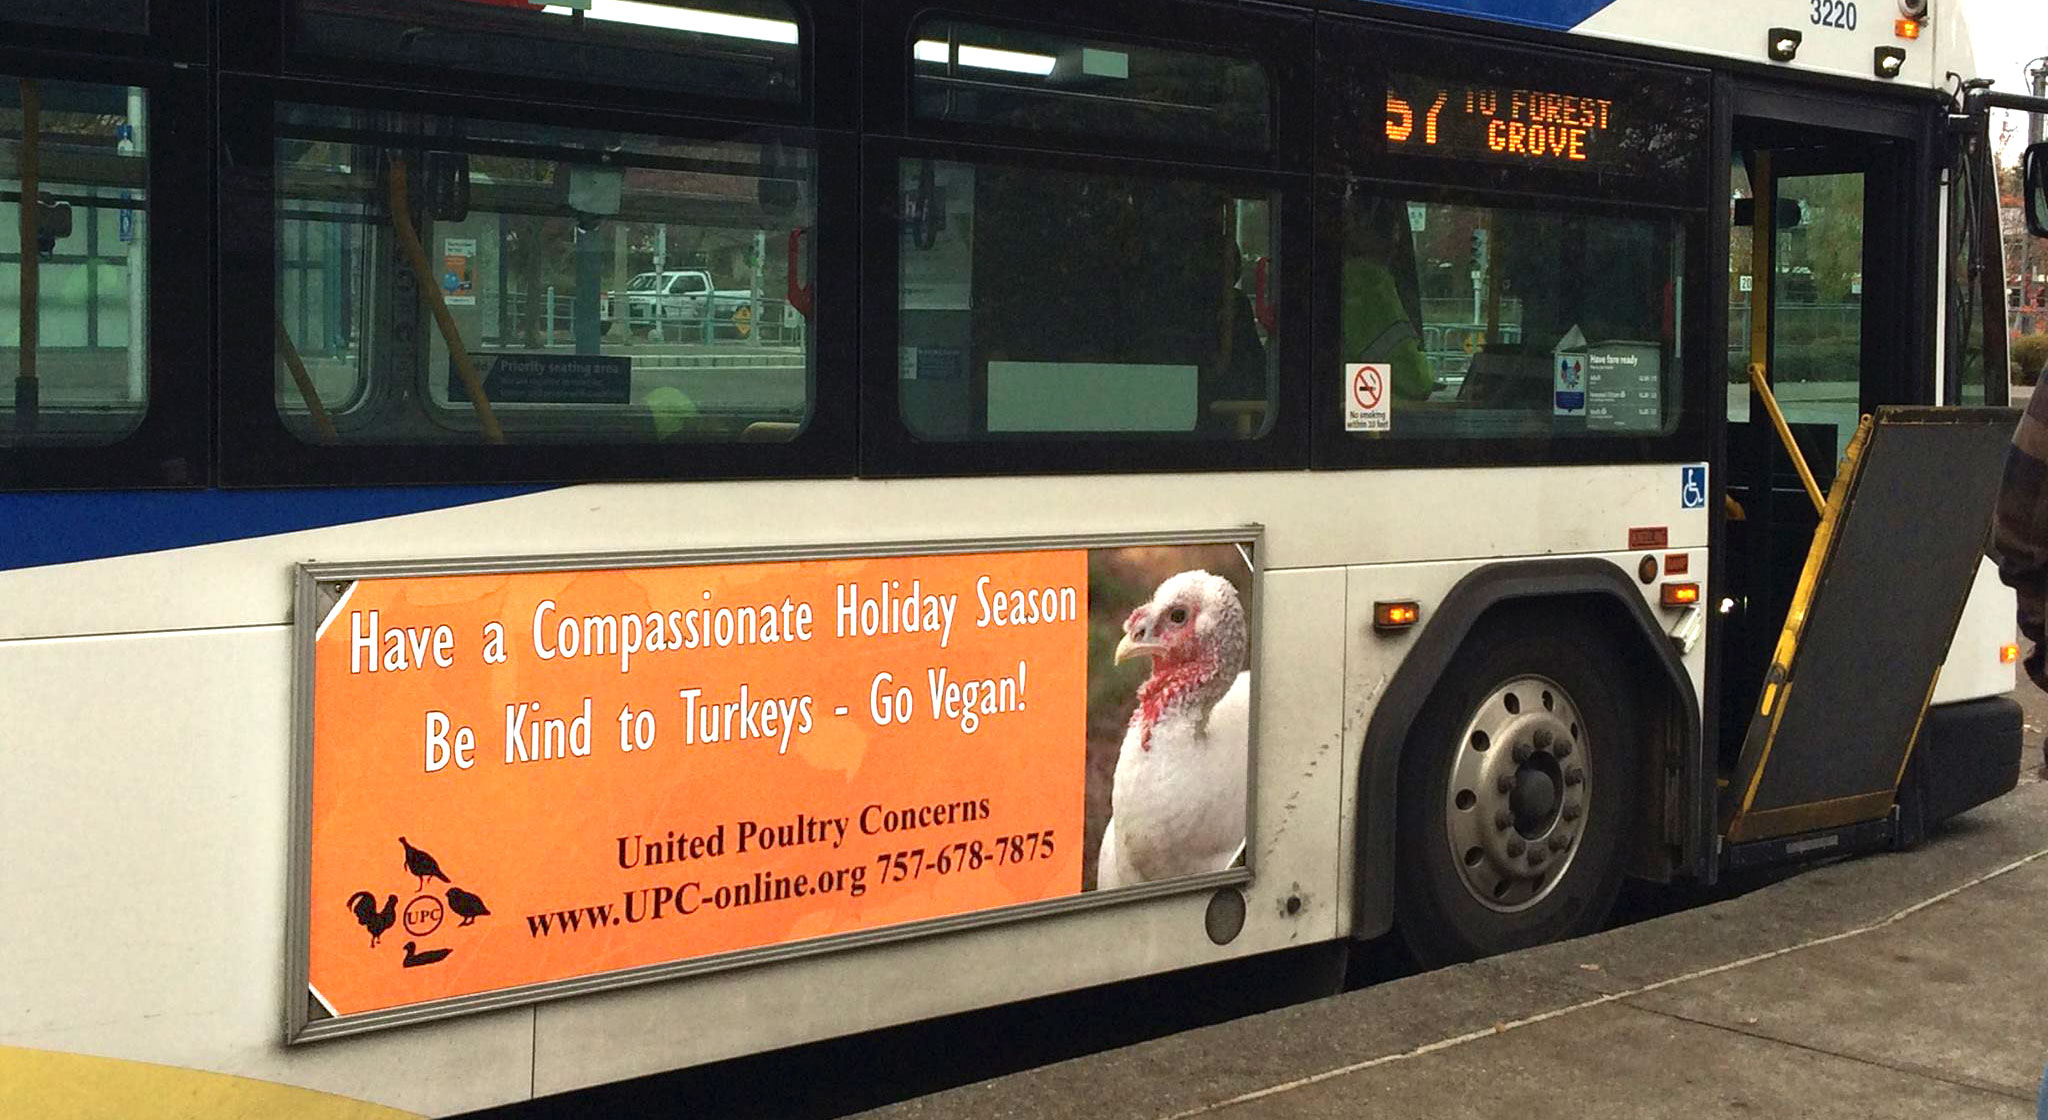 Bus sign: Have a Compassionate Holidy Season. Be Kind to Turkeys - Go Vegan!